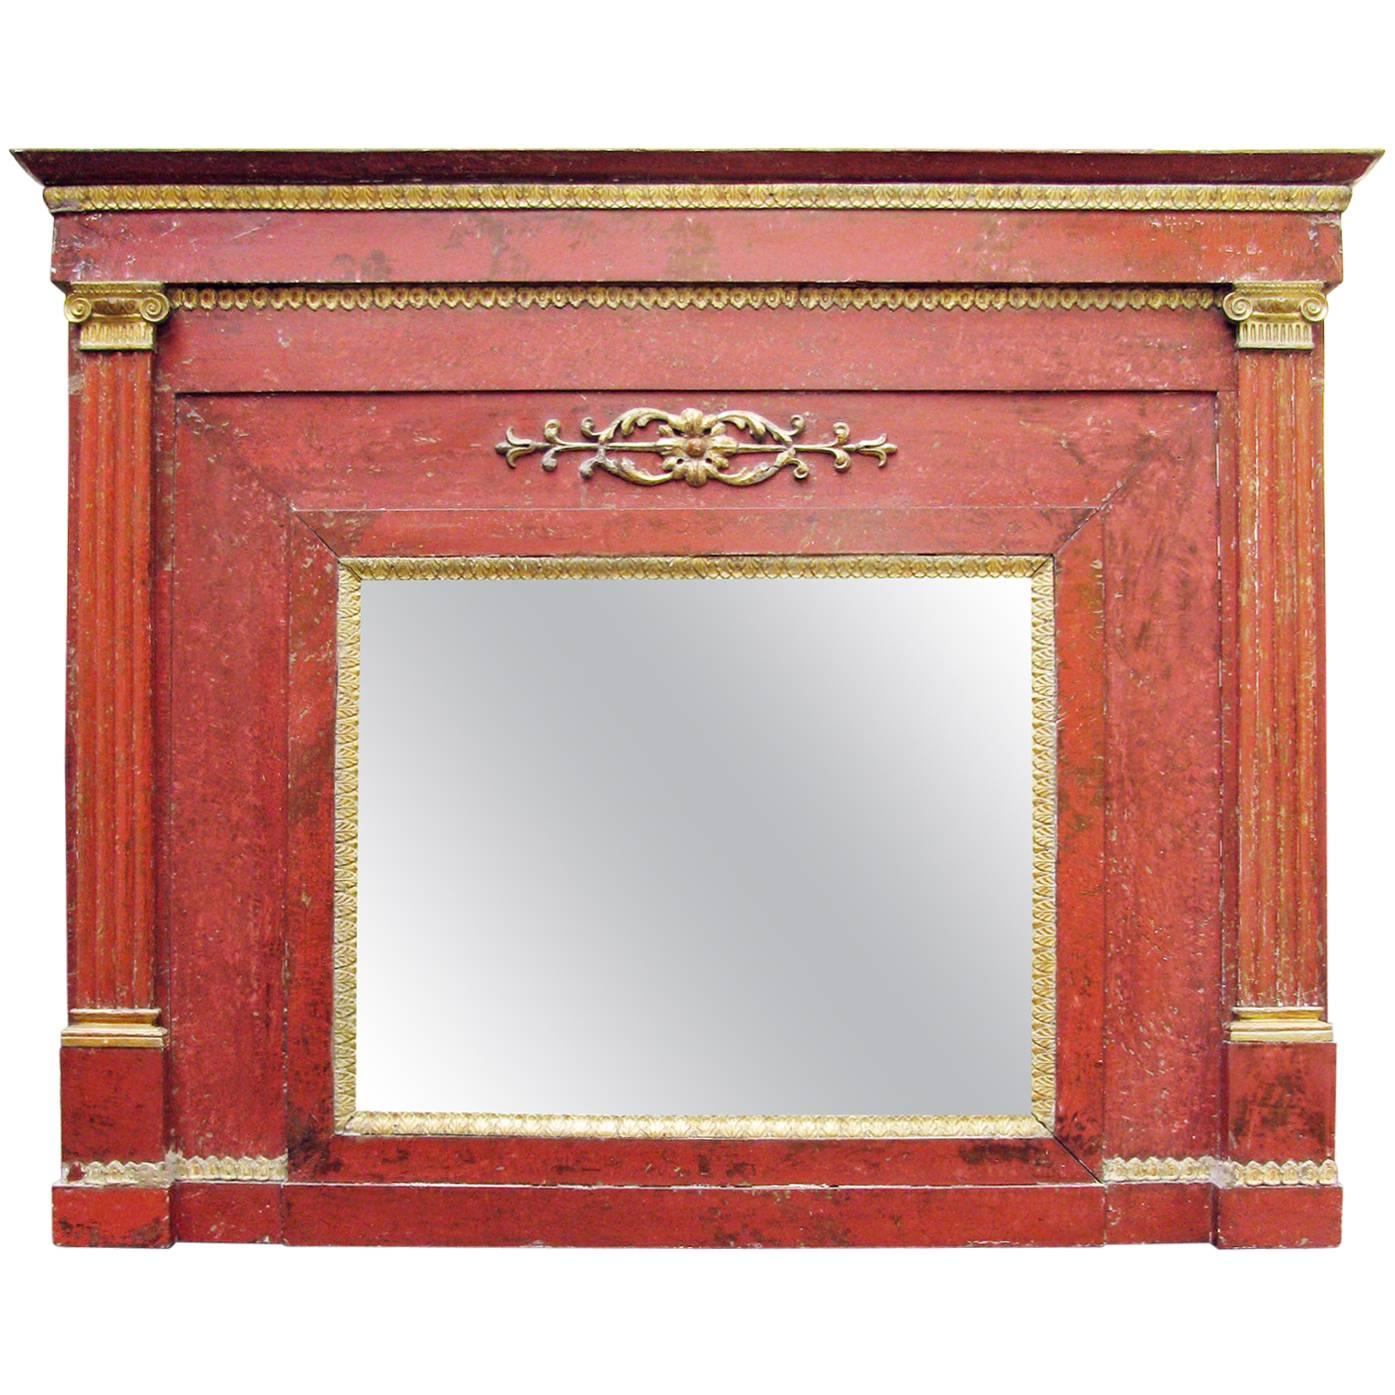 Early 19th Century Italian Neoclassical Overmantel Mirror with Mercury Glass